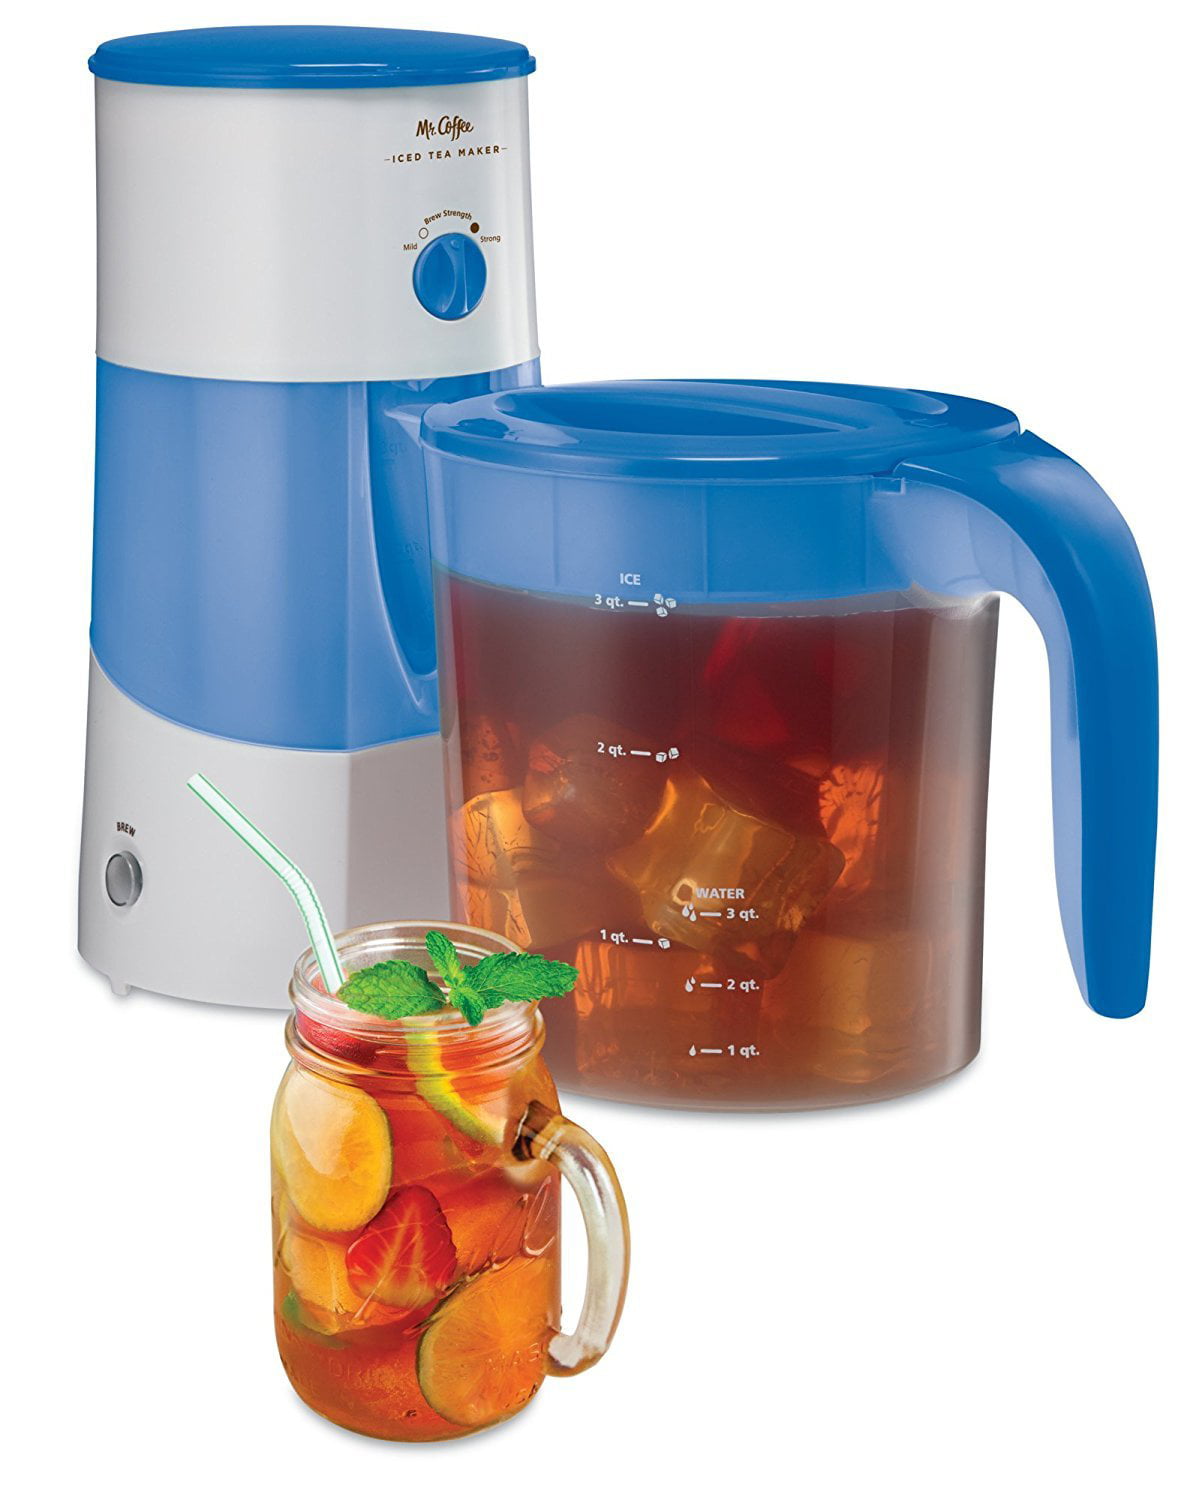 A Refreshing Drink is Minutes Away with the 9 Best Iced Tea Makers